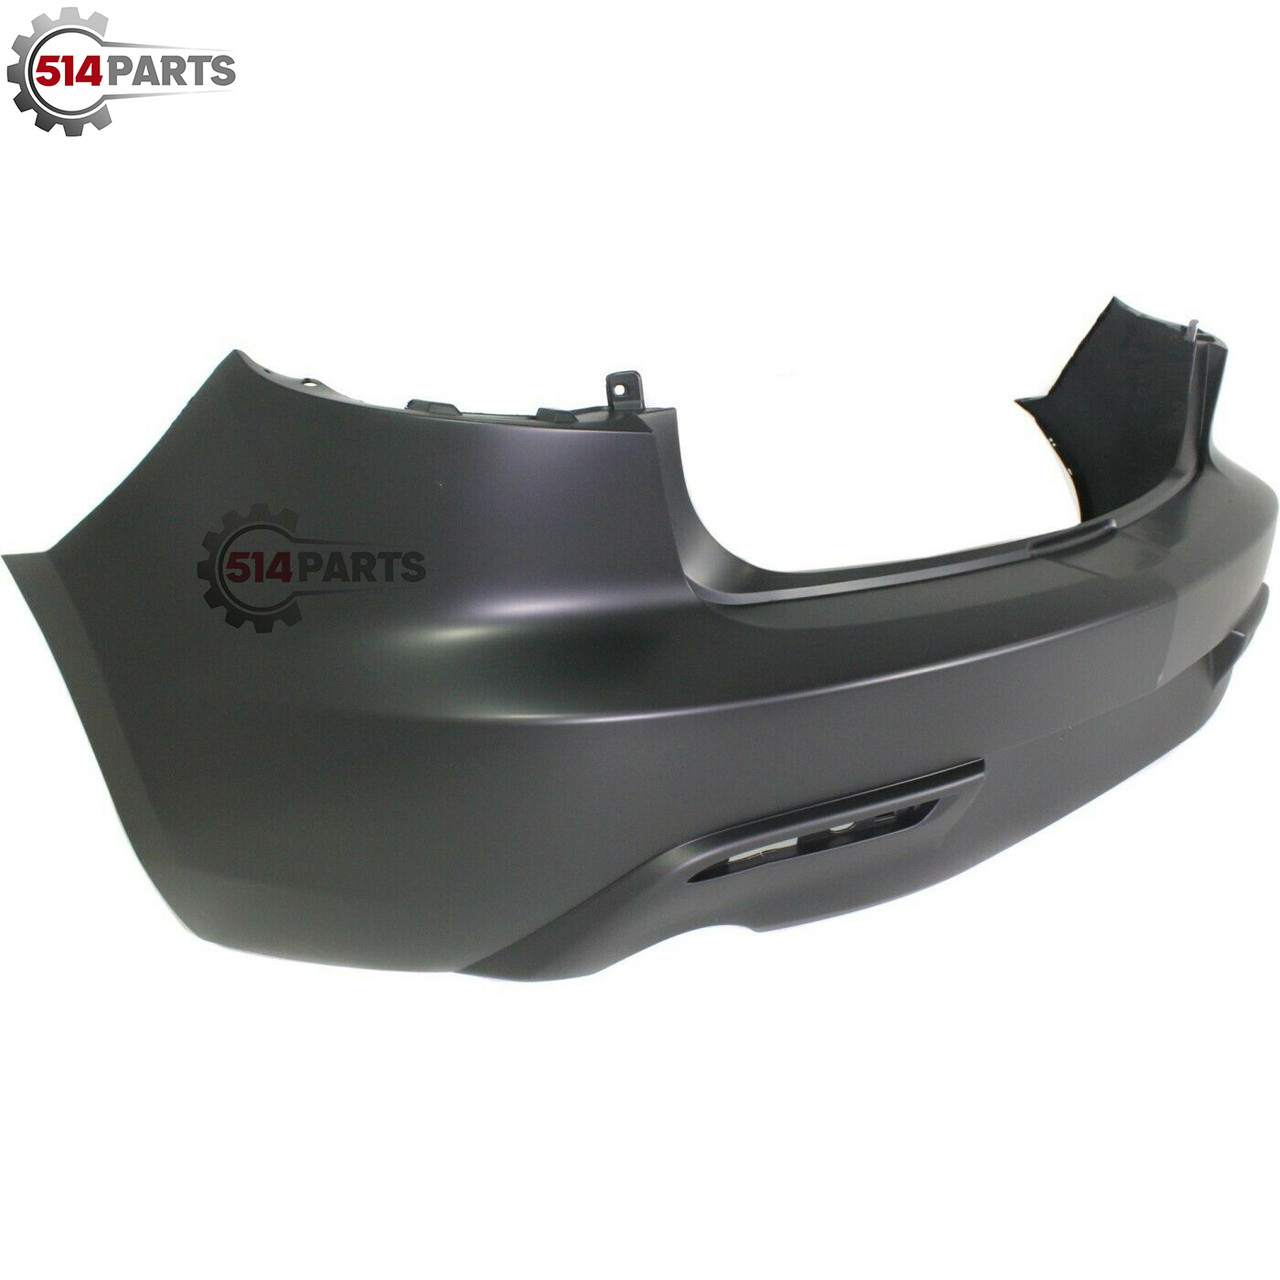 2010 - 2011 MAZDA 3 2.0L SEDAN with TEXTURED LOWER PRIMED REAR BUMPER COVER - PARE-CHOC ARRIERE PRIME avec BAS TEXTURE